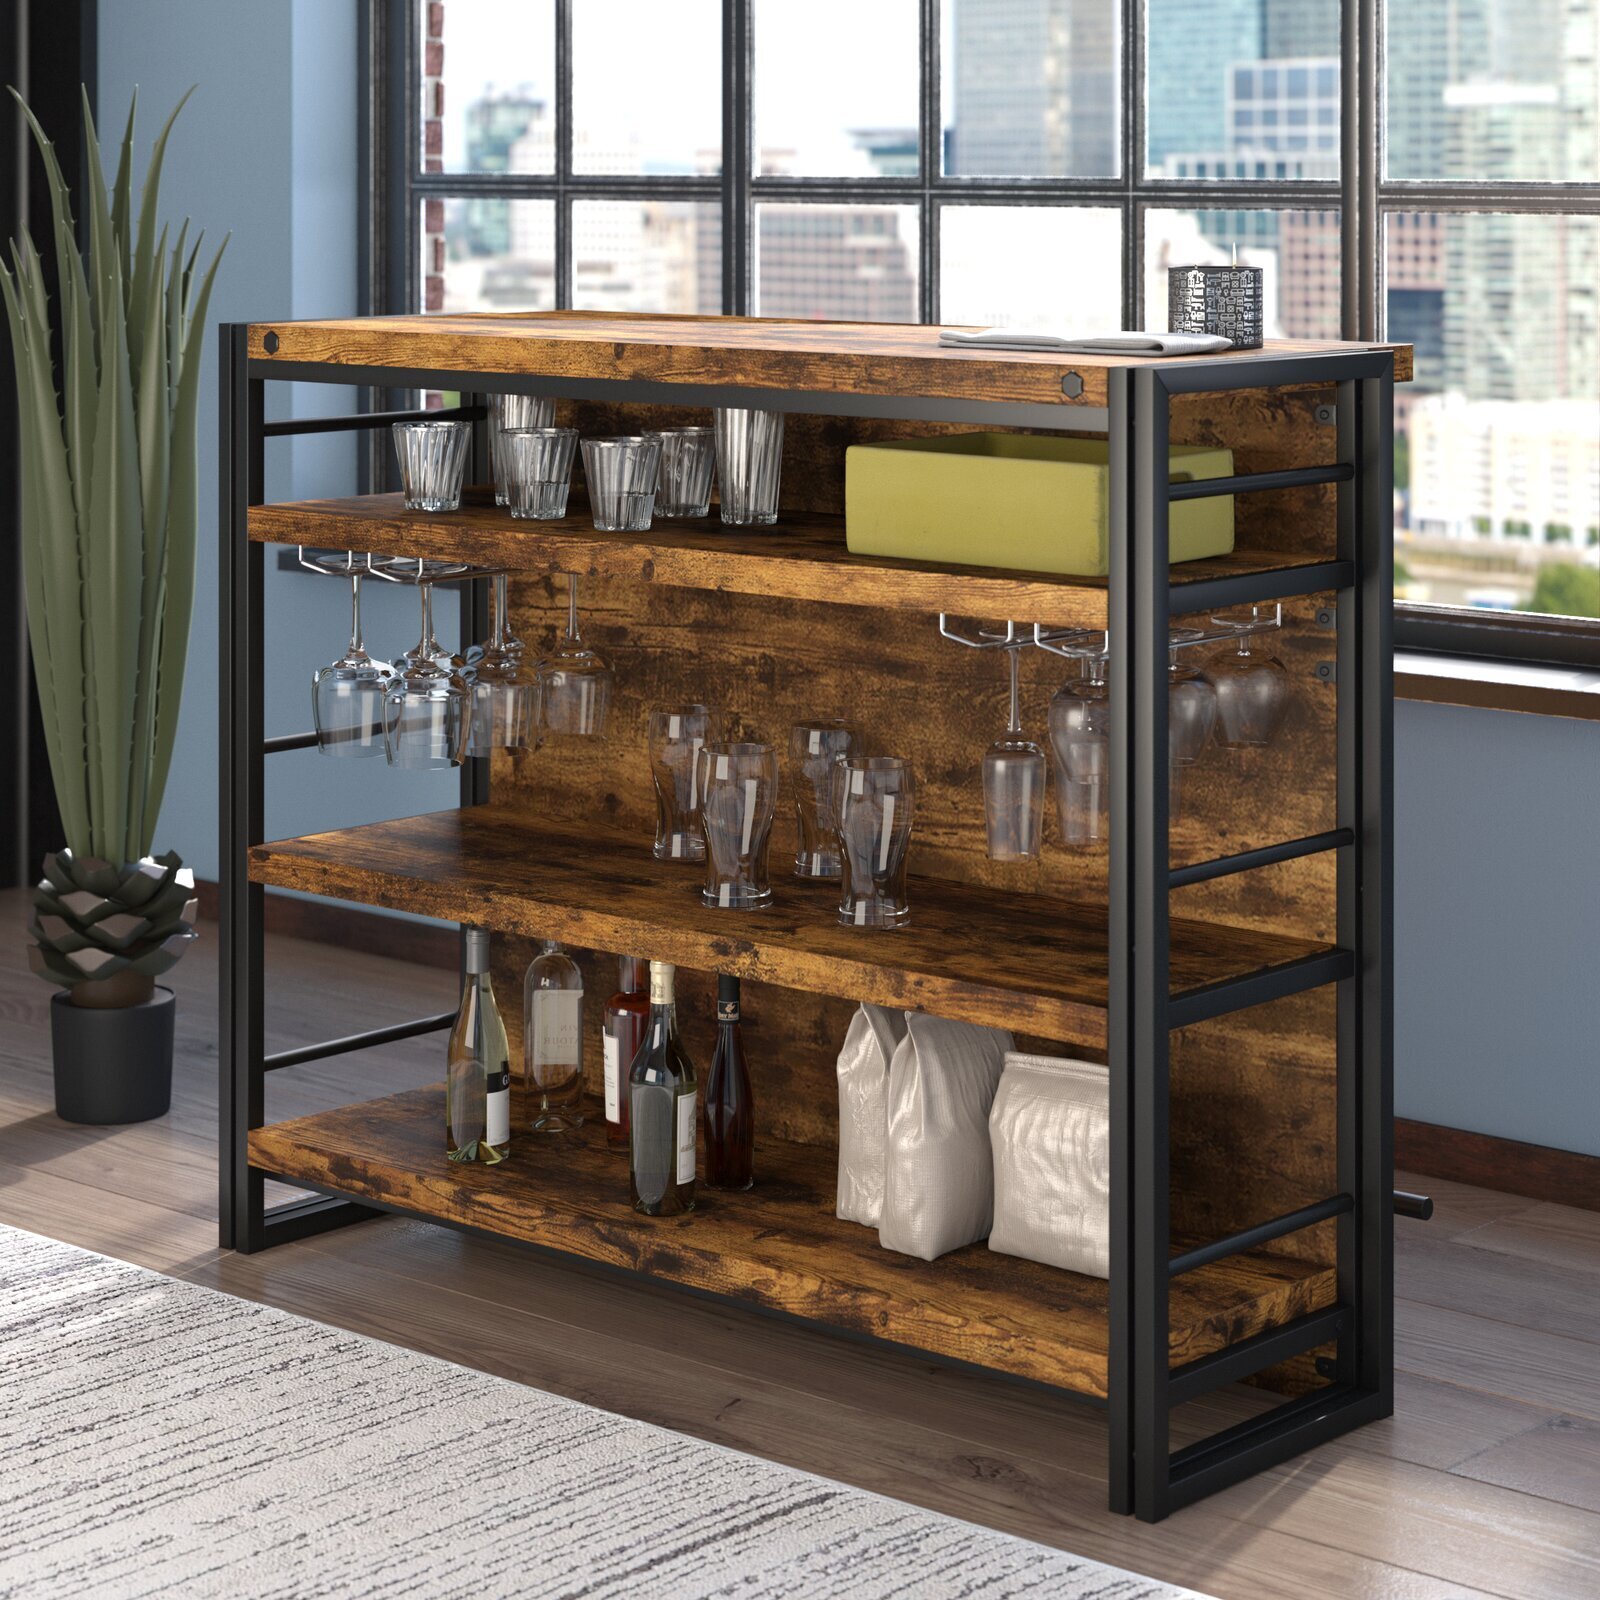 Two sided Free standing Bar With Wine Storage